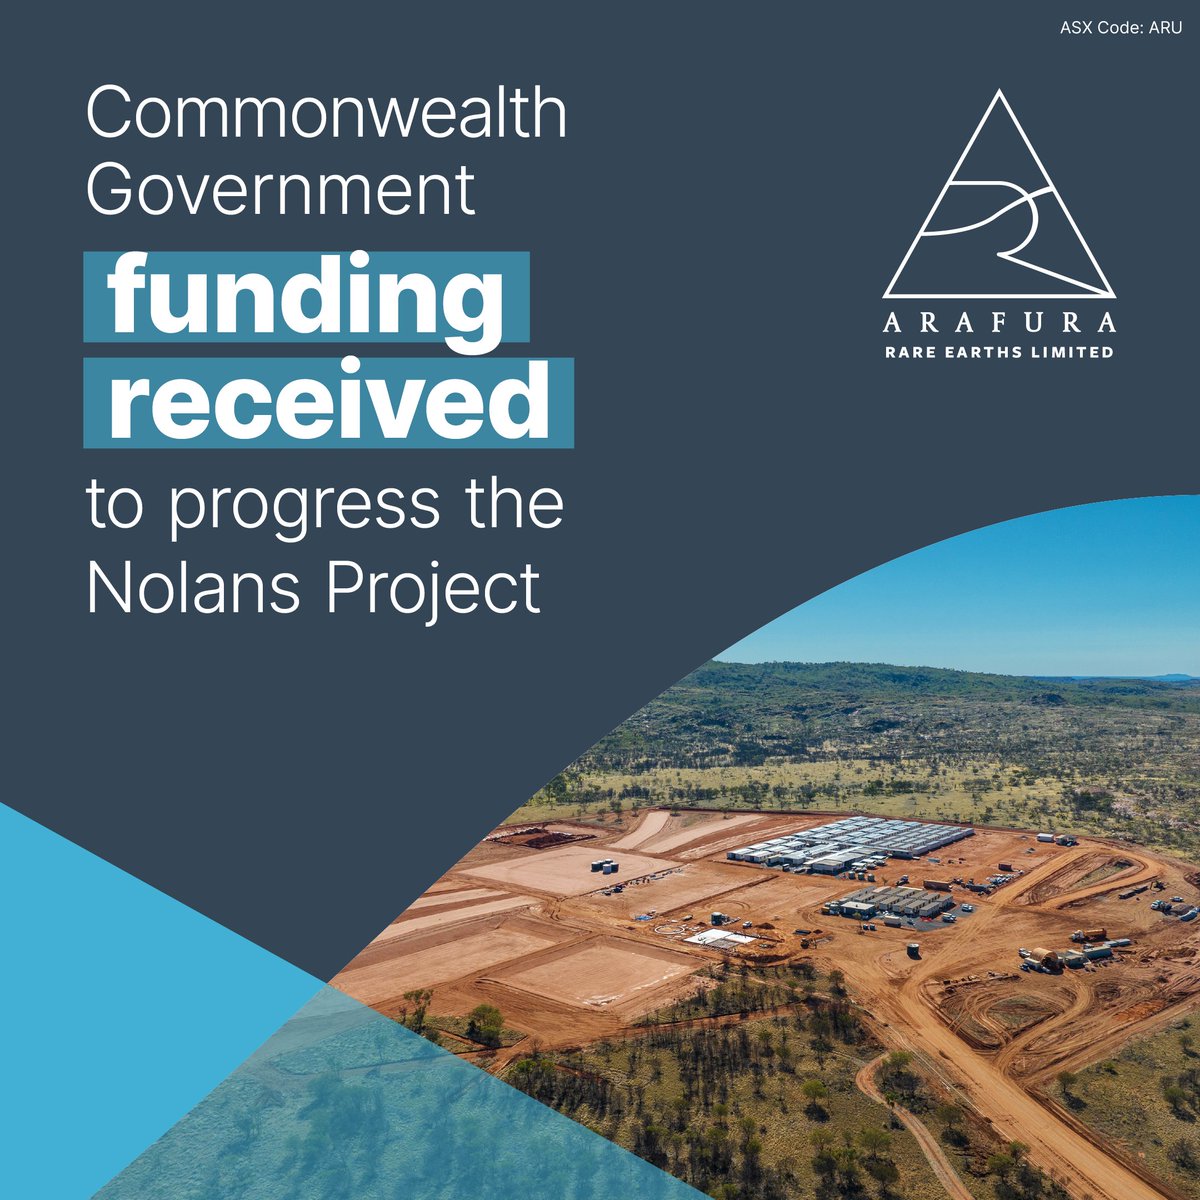 It’s official: US$533m in funding announced. The Commonwealth Government announced ARU received support to progress the Nolans Project through a US$533m finance package. Read more: bit.ly/3vatzro #NolansProject #NdPr #RareEarths #CriticalMinerals #WesternAustralia